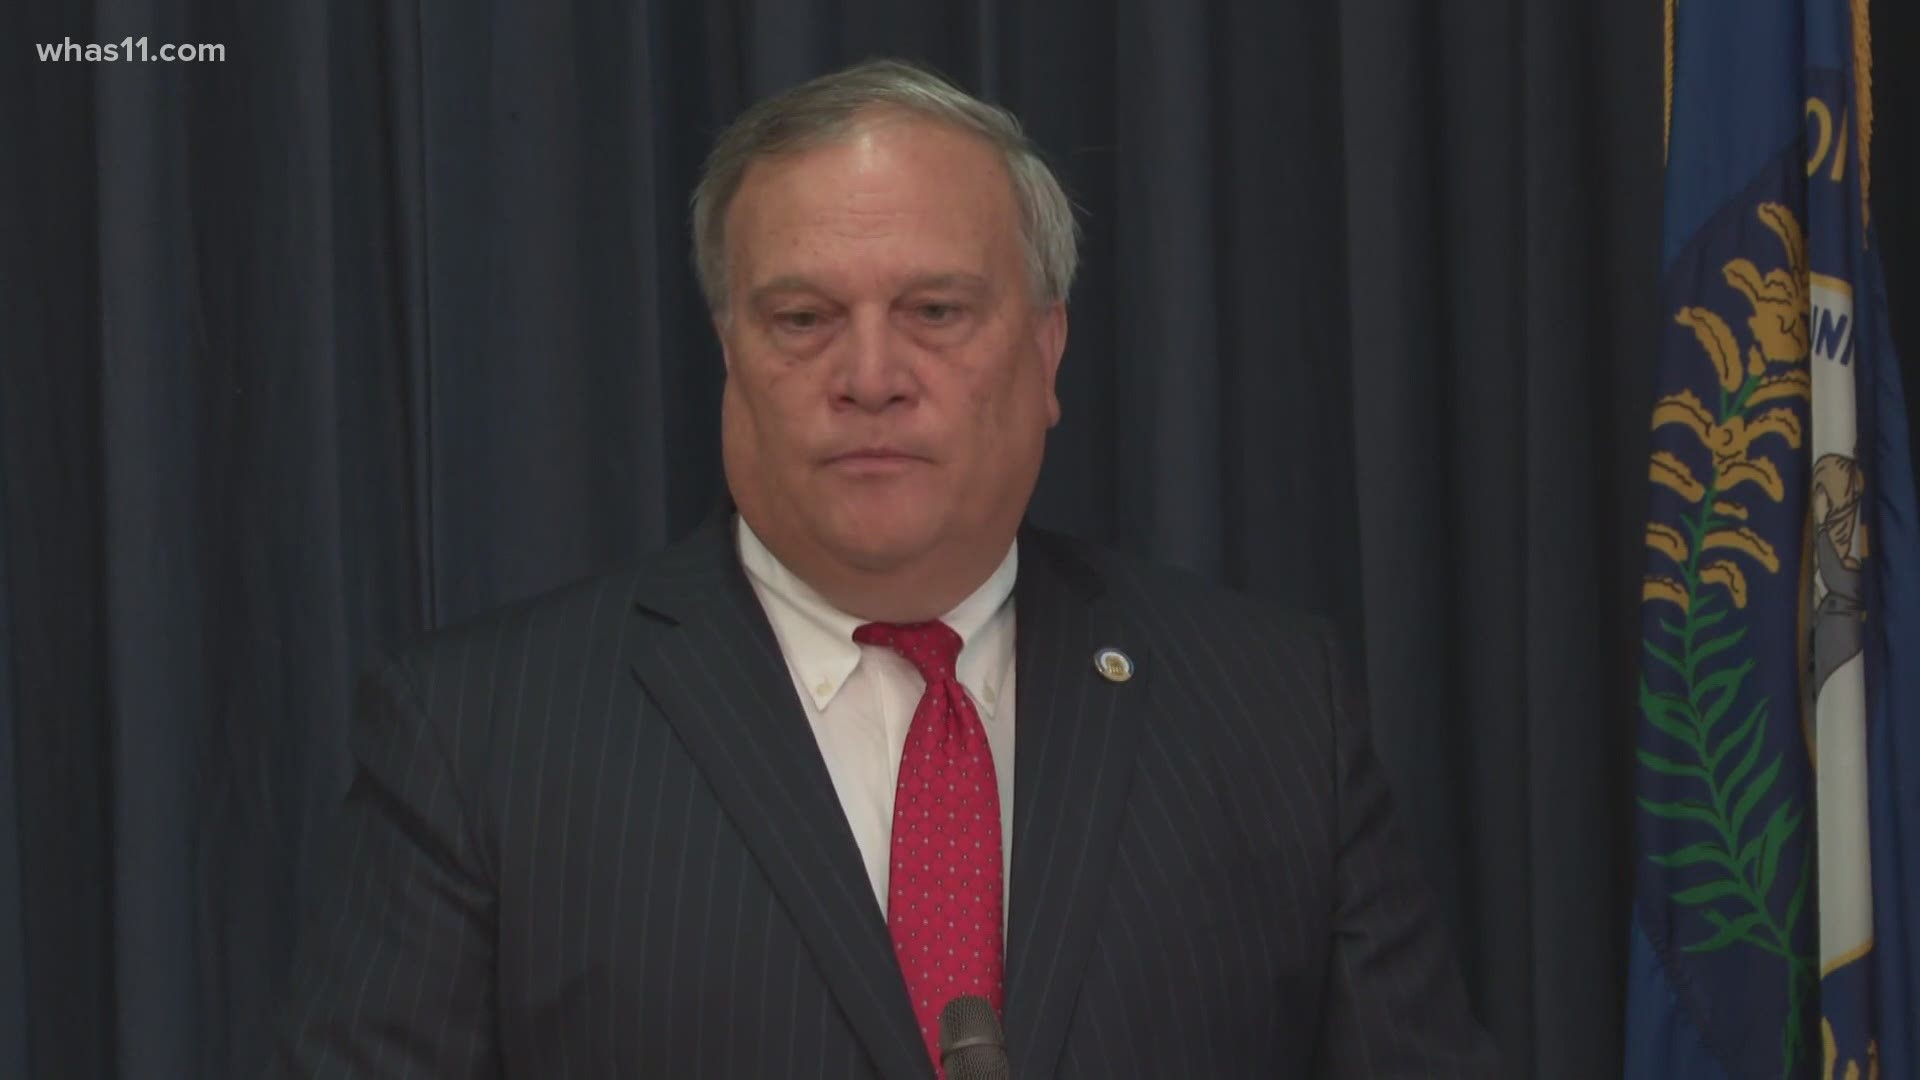 The top legislator in the Kentucky Senate announced today he is working on a bill that would essentially ban no-knock search warrants in Kentucky.